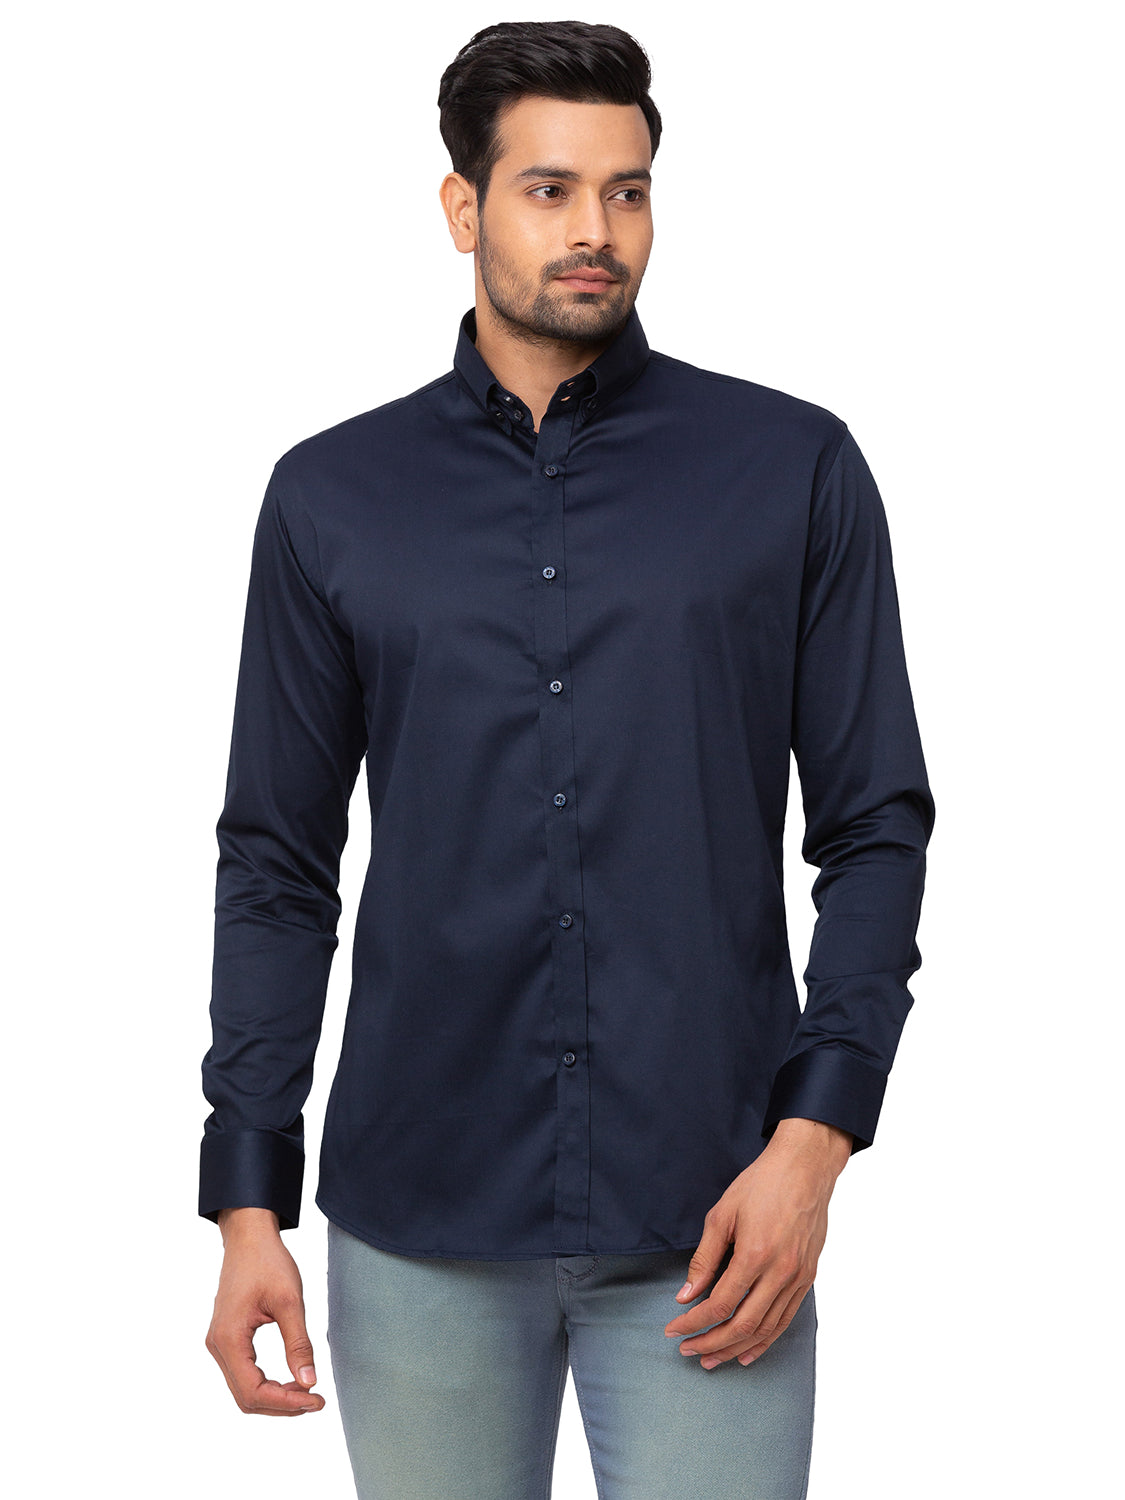 Navy Blue Formal Shirt with Button-down Collar